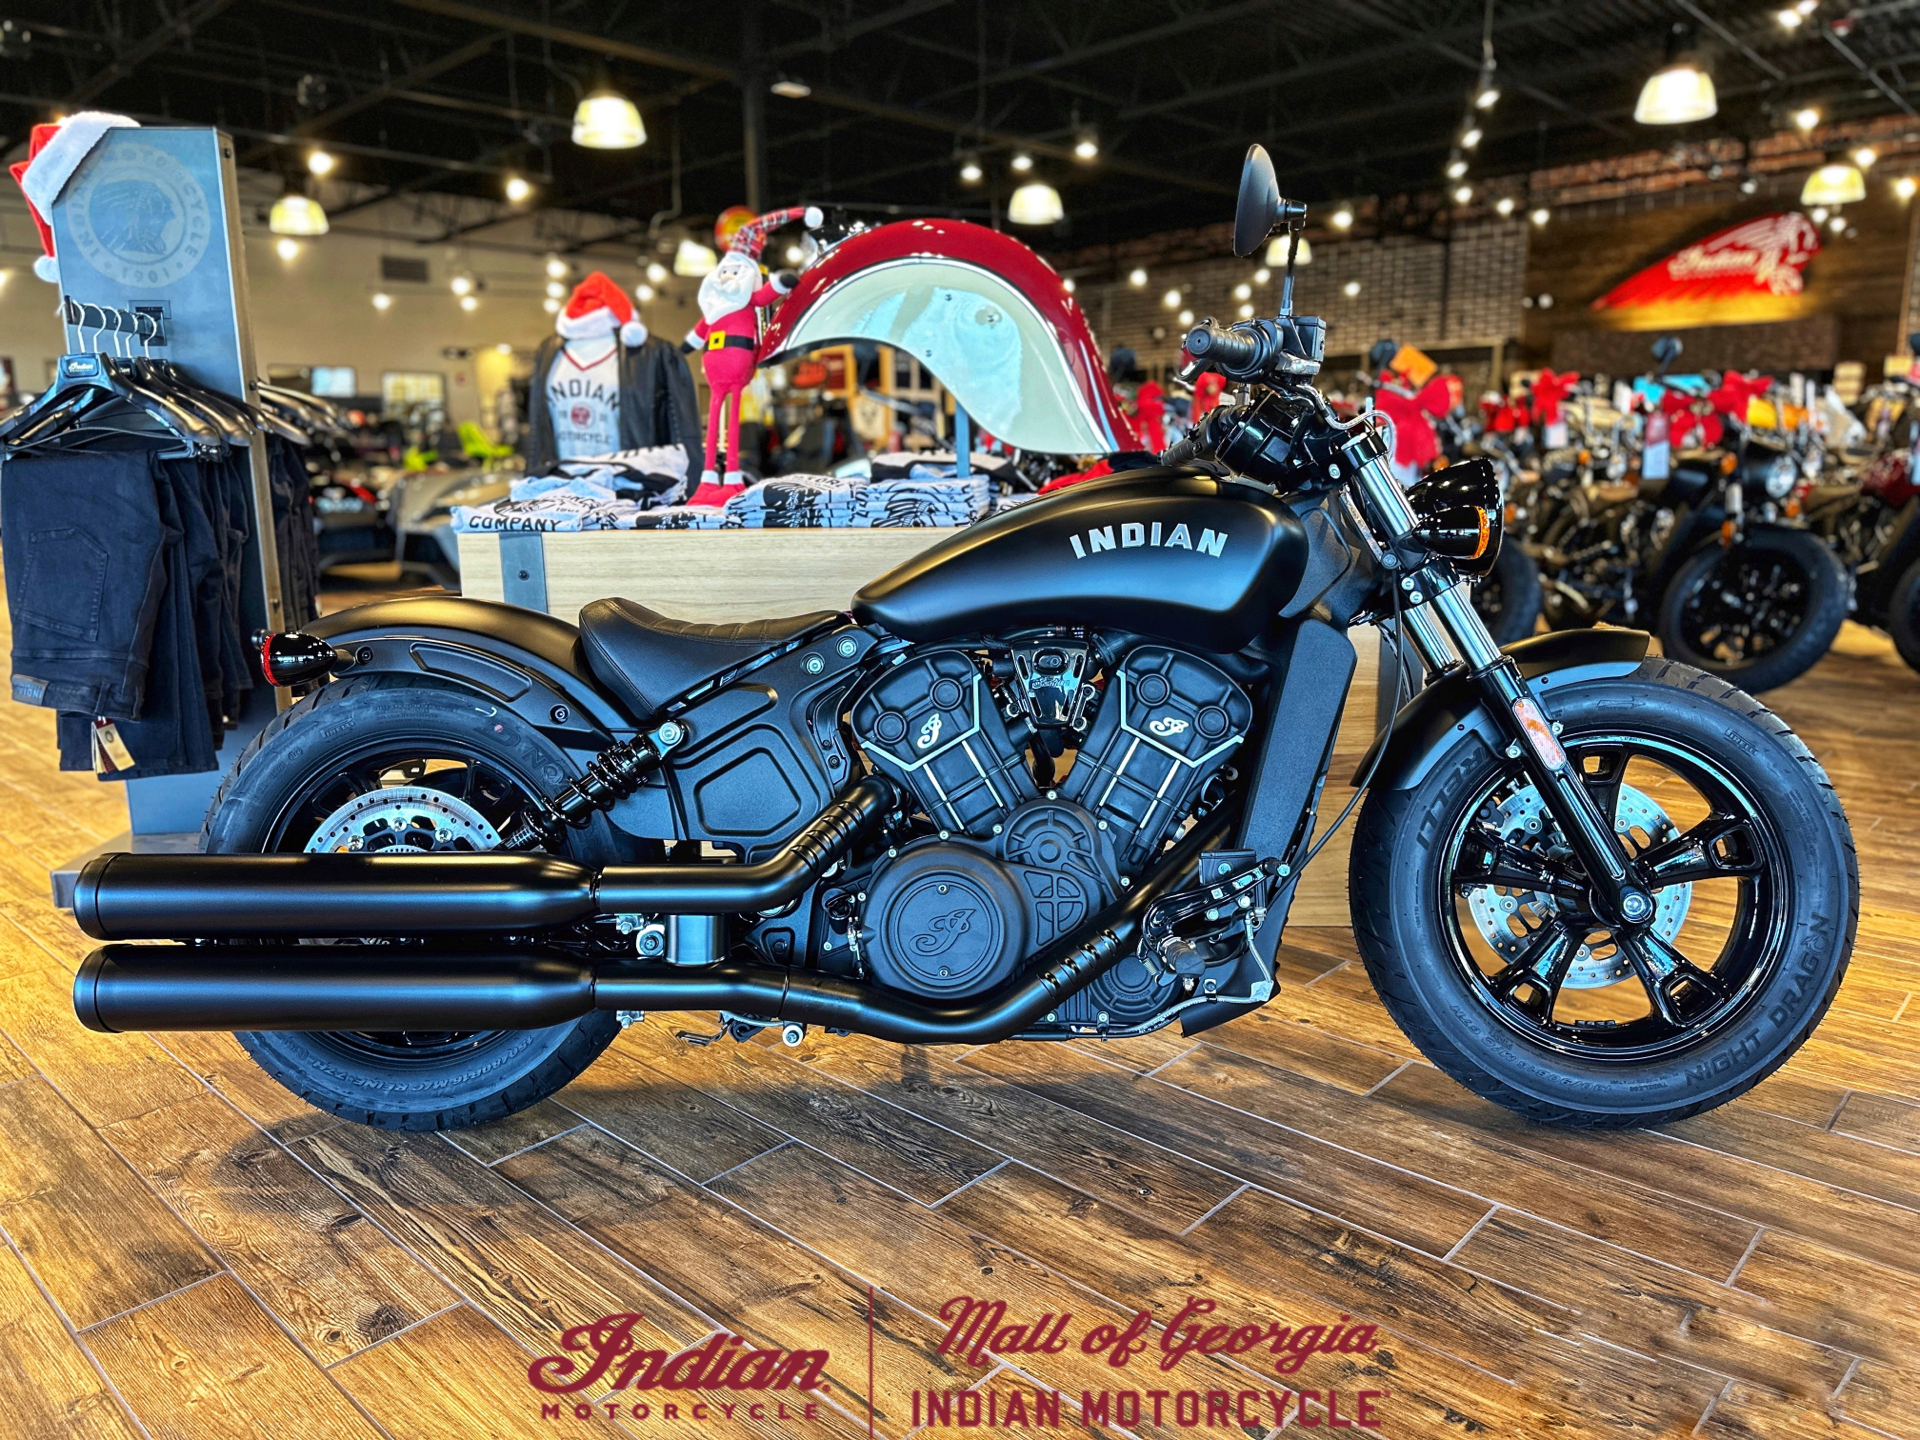 2023 Indian Motorcycle Scout® Bobber Sixty ABS in Buford, Georgia - Photo 1